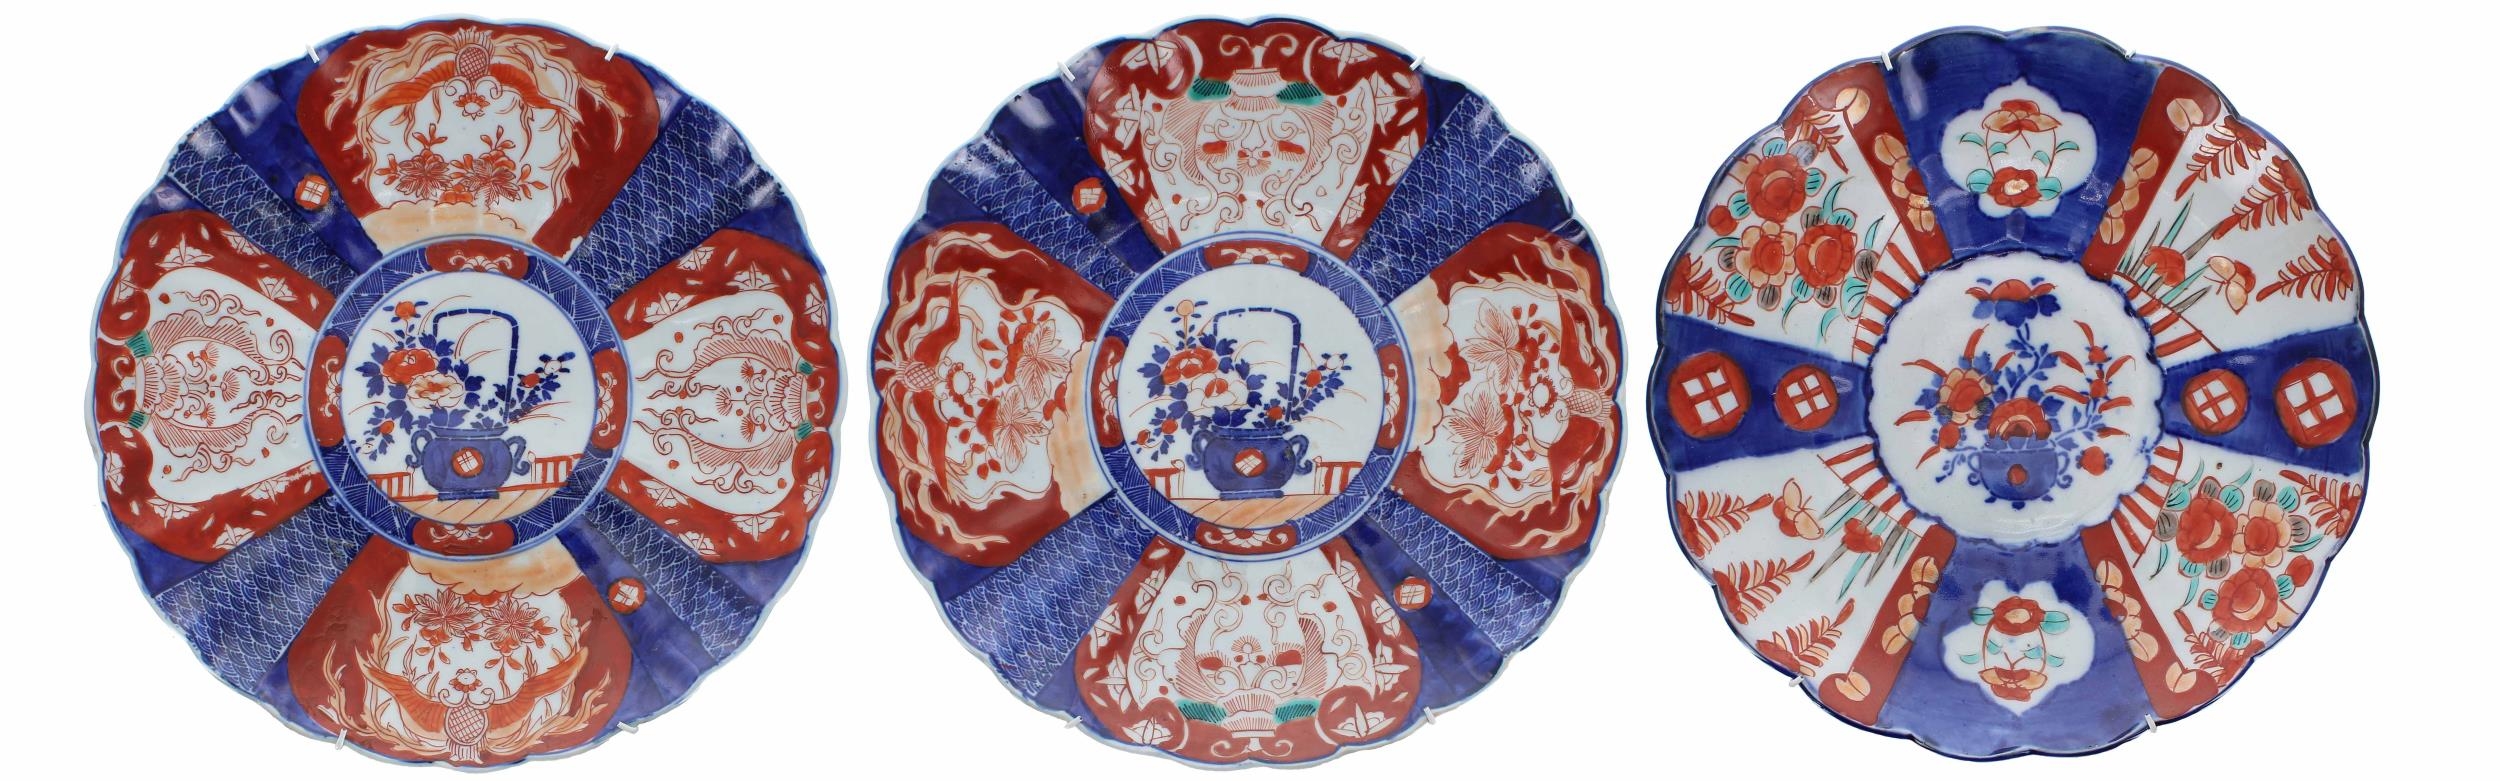 Three similar Japanese Imari fluted porcelain wall chargers, each with foliate designs in typical